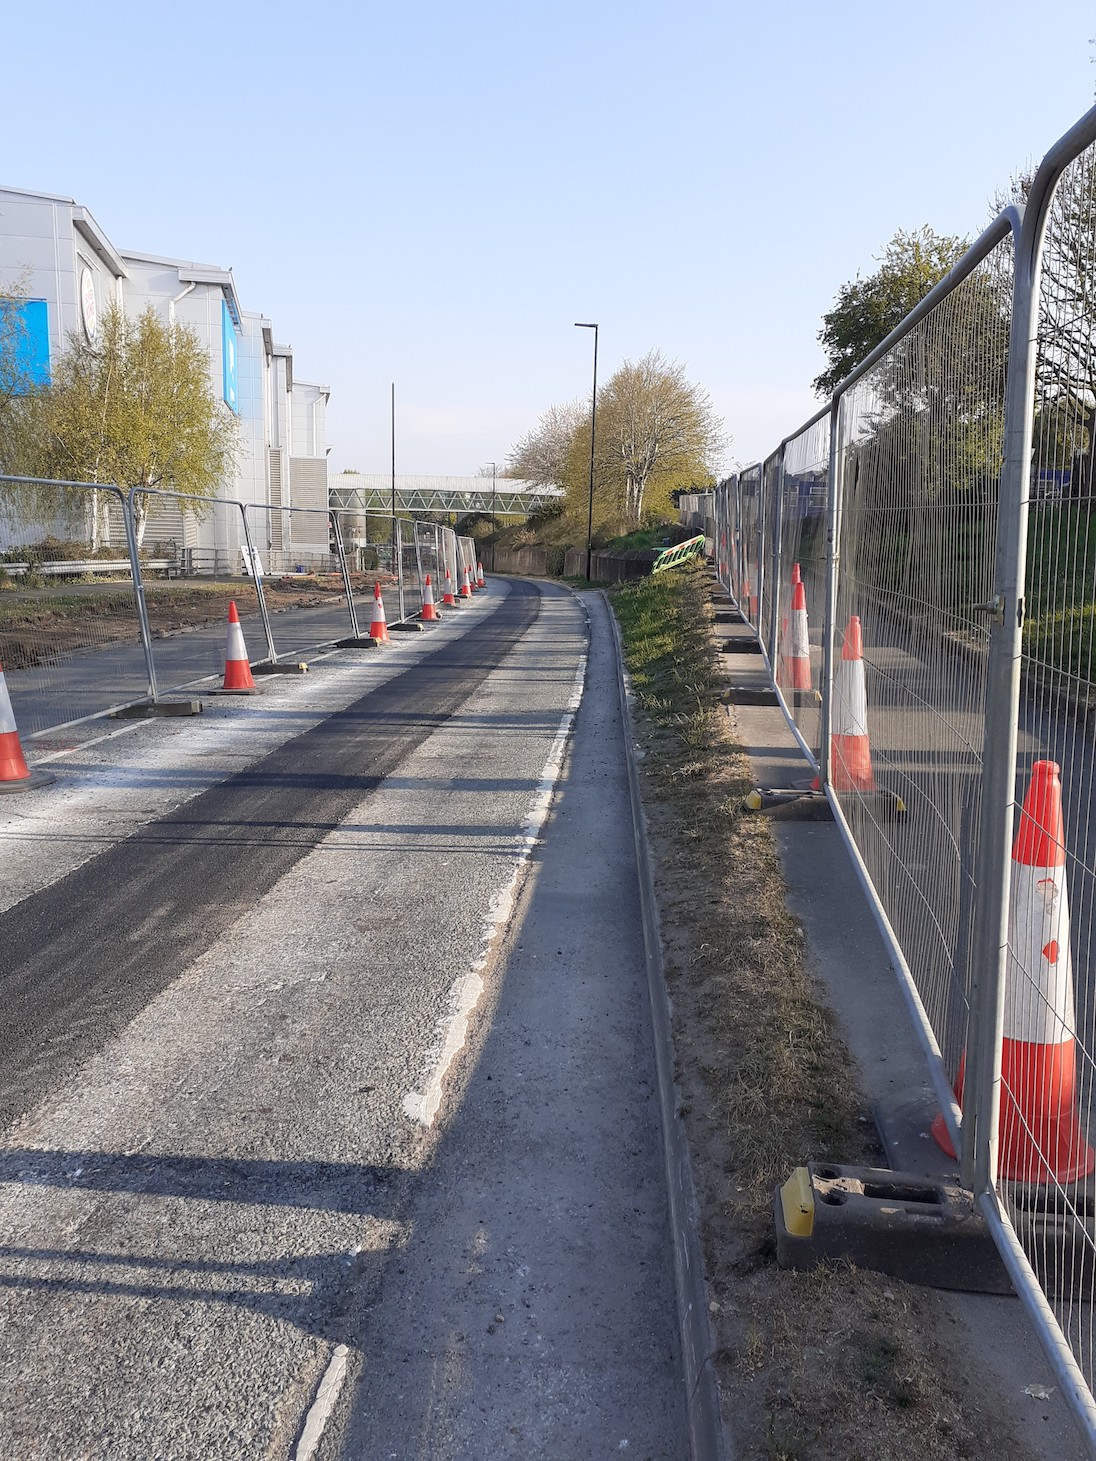 road with fencing on either side and traffic cones, surface of the road showing work underway